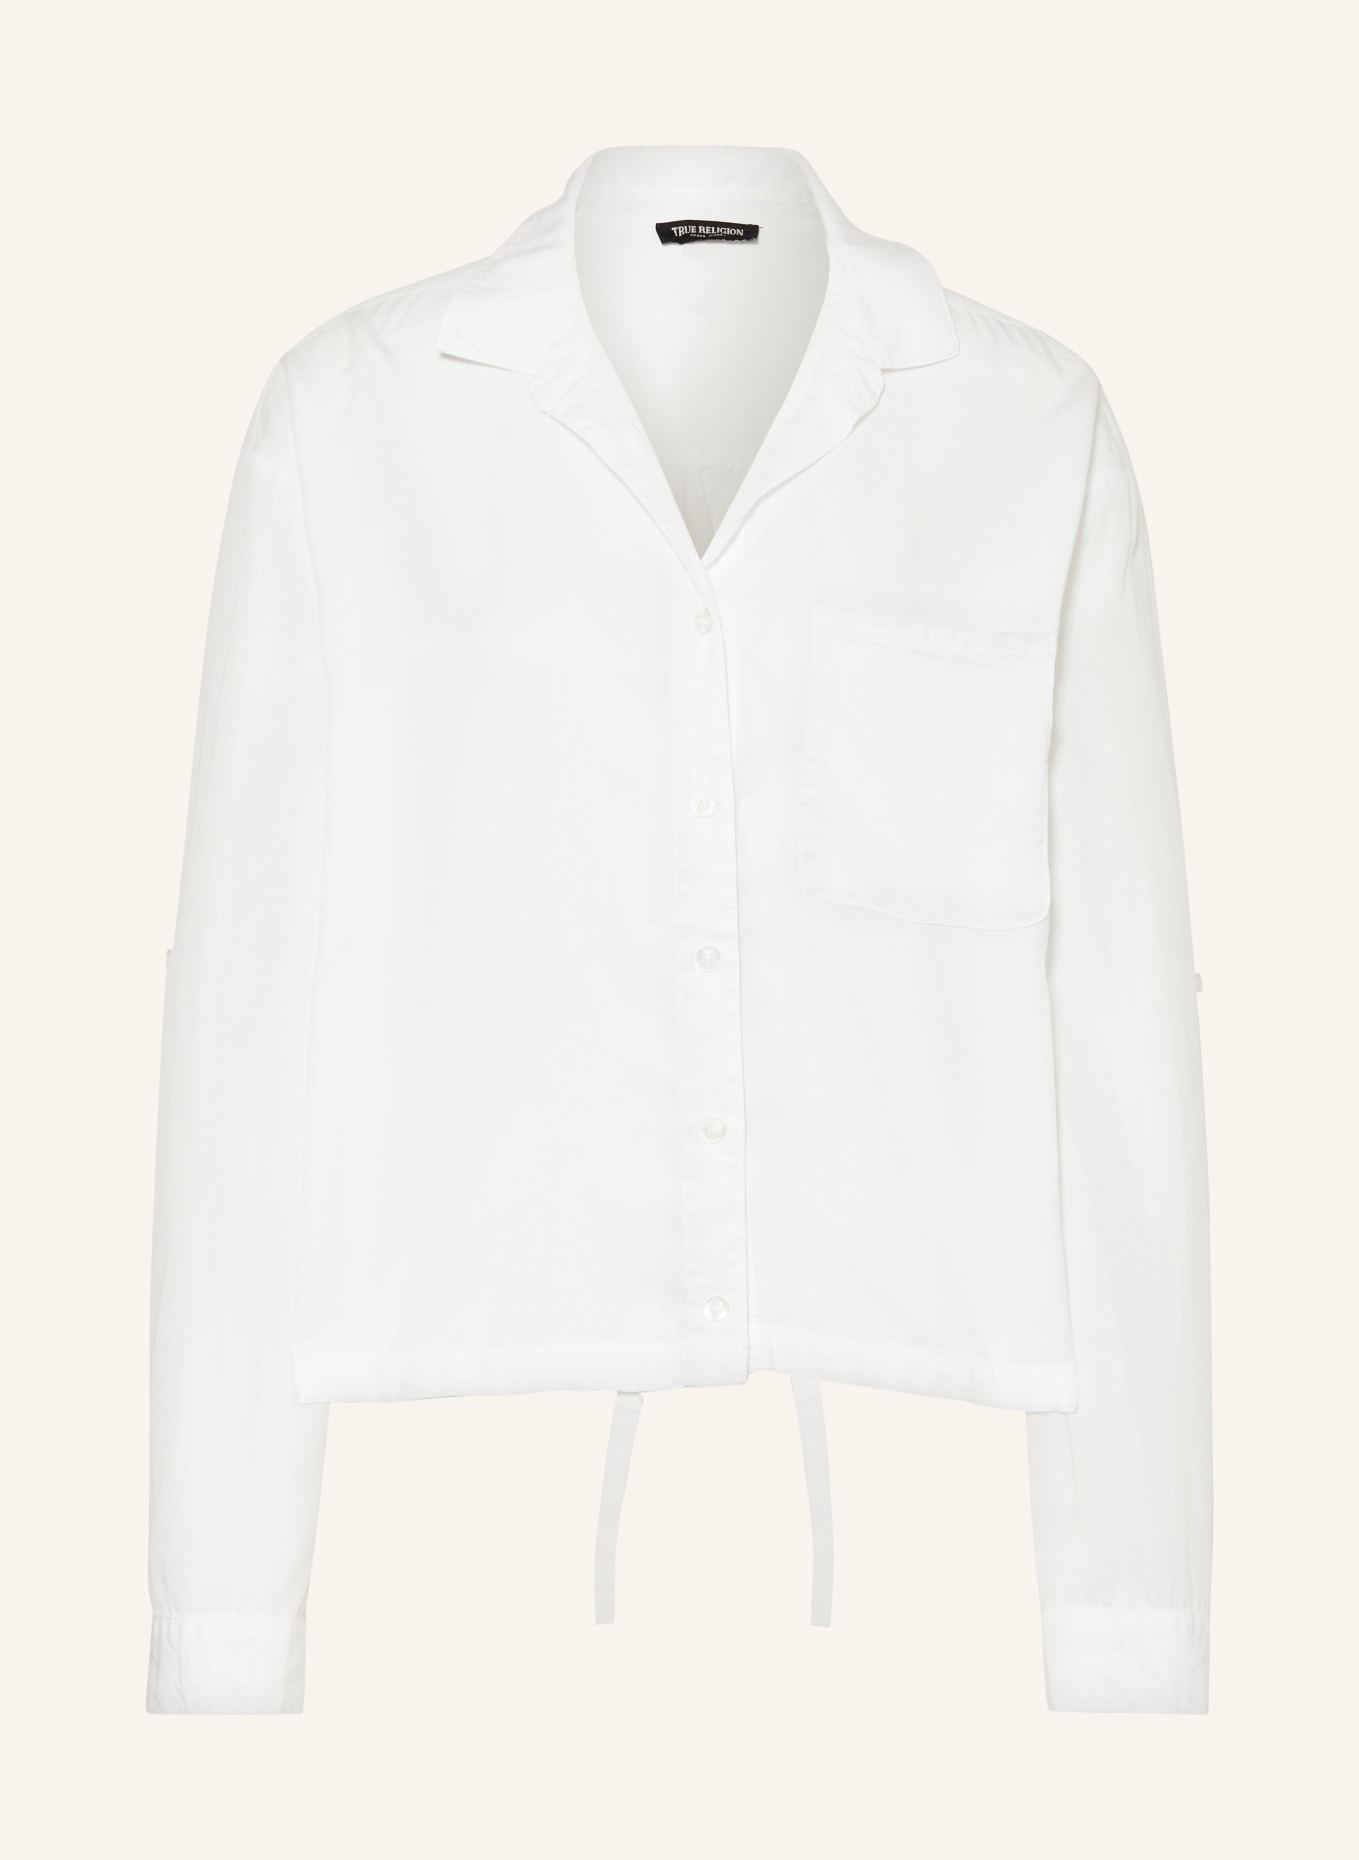 TRUE RELIGION Shirt blouse with ruffles, Color: WHITE (Image 1)